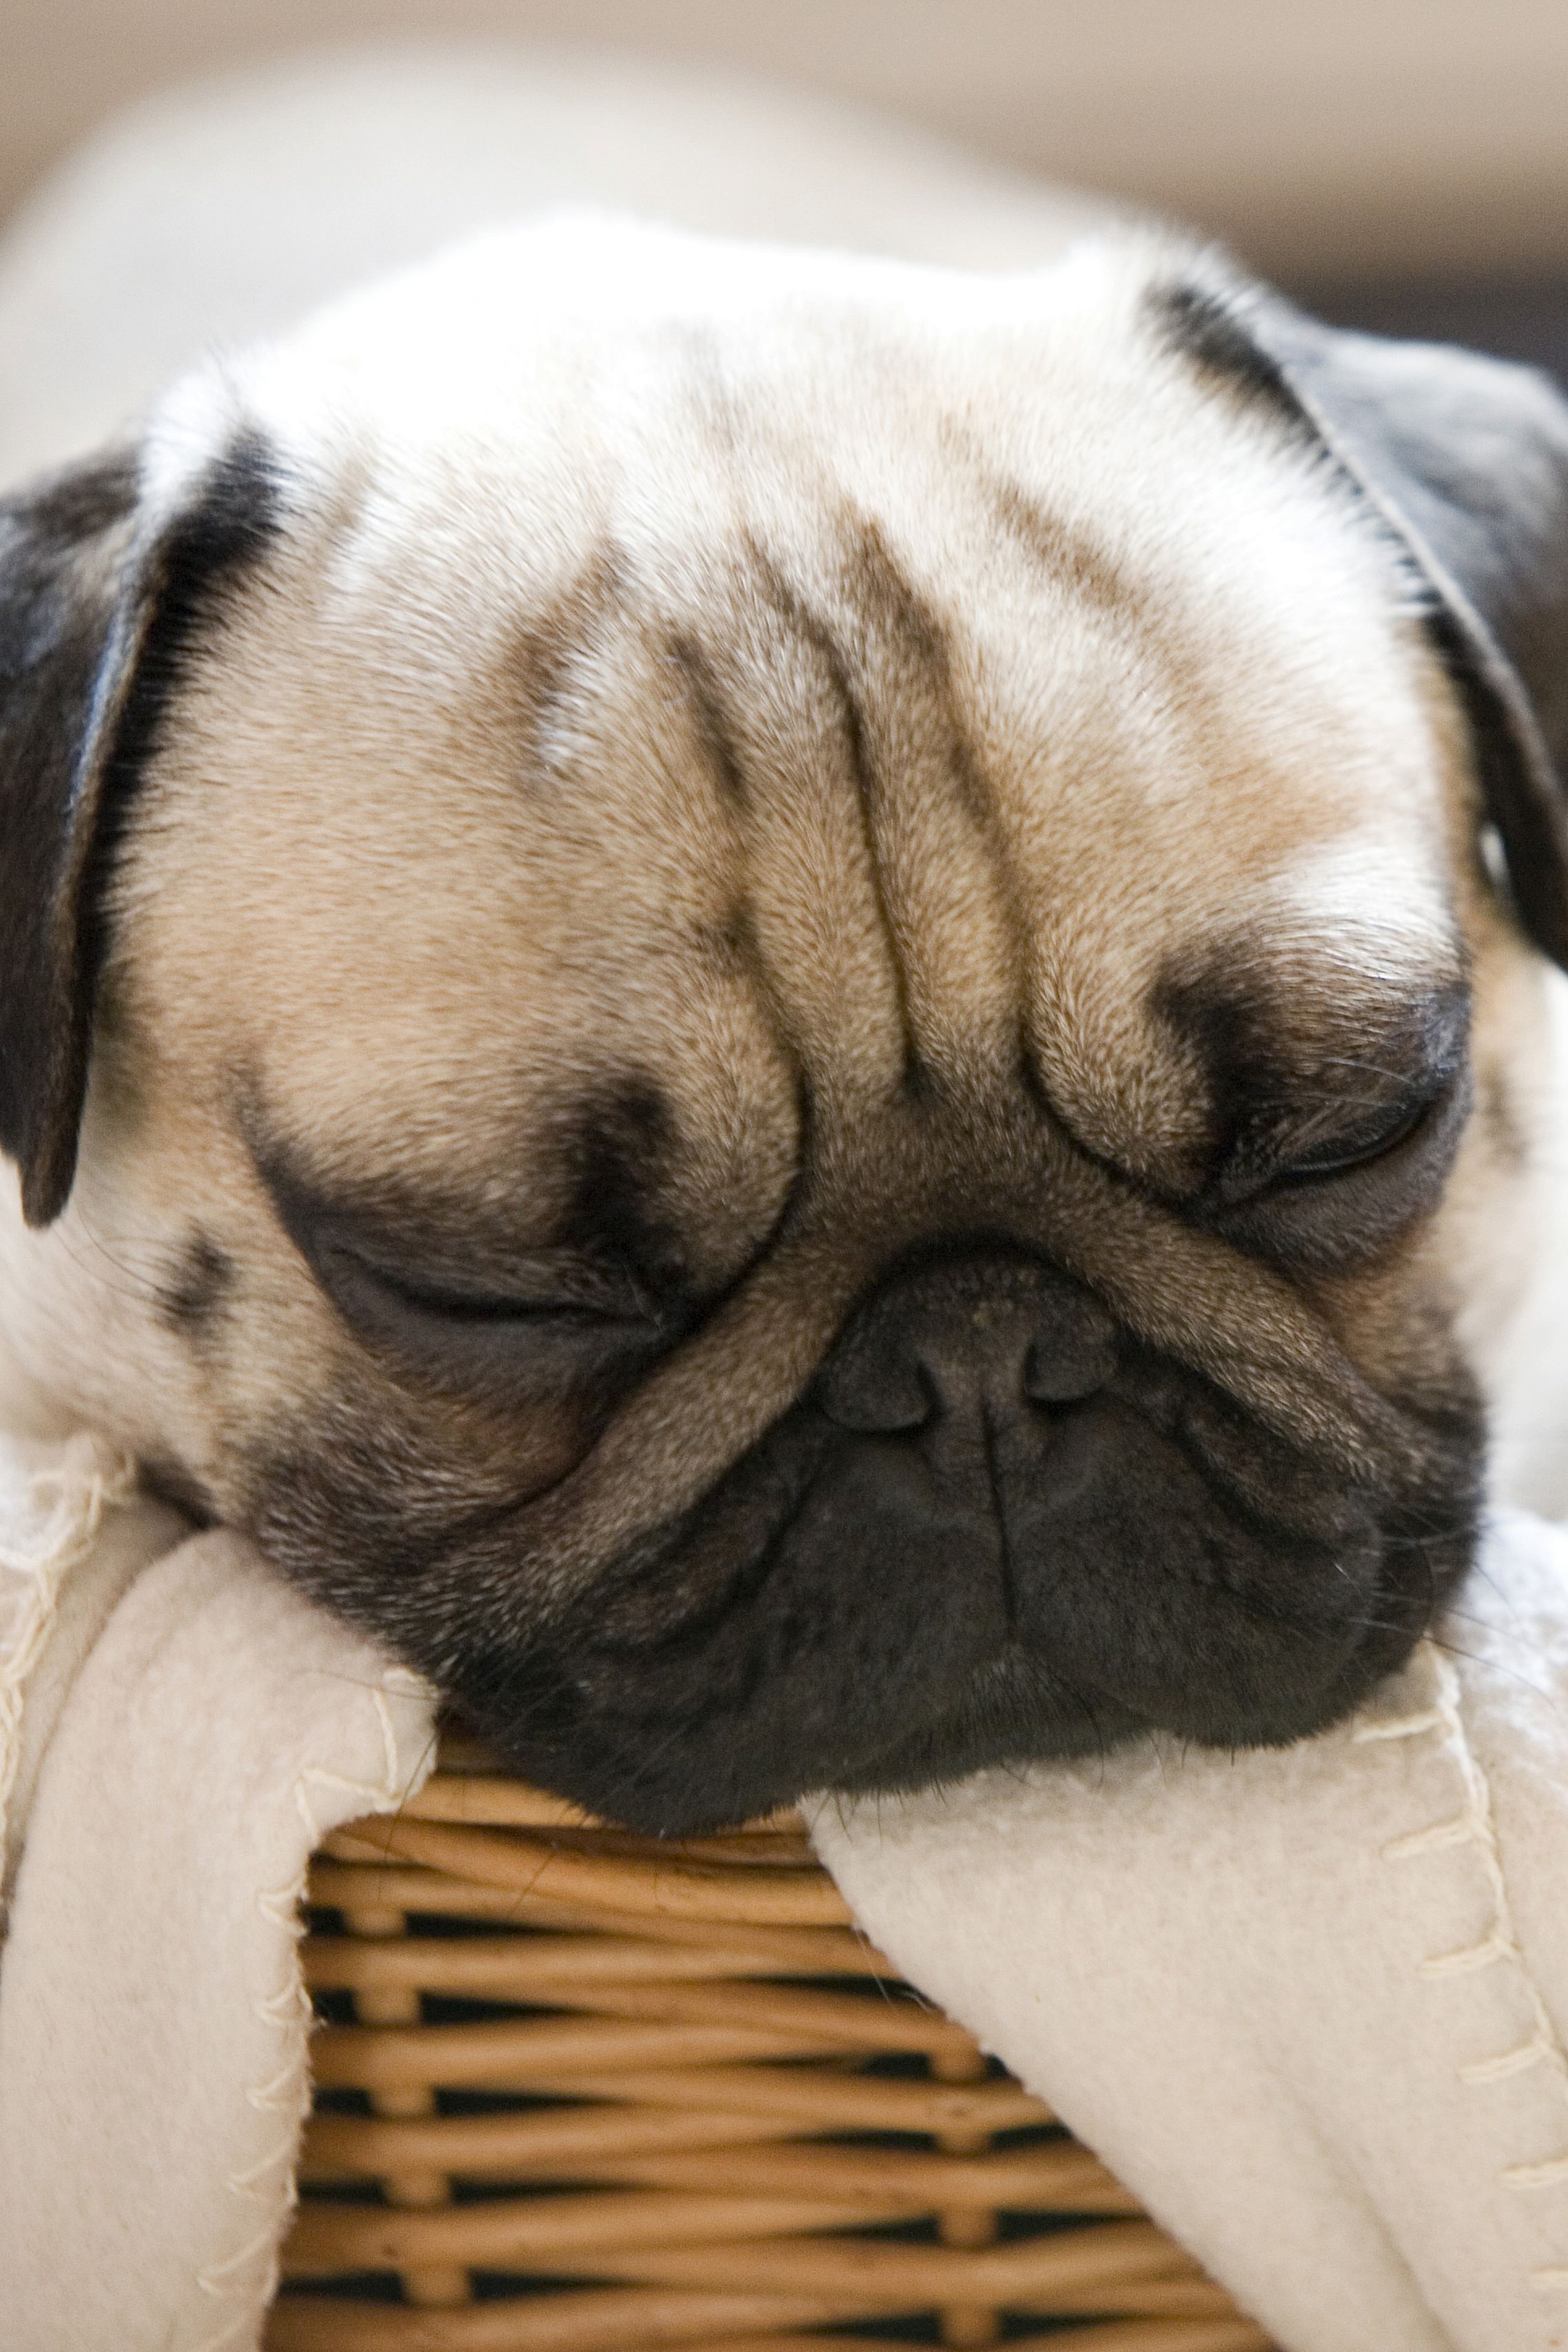 the most lazy dog breeds